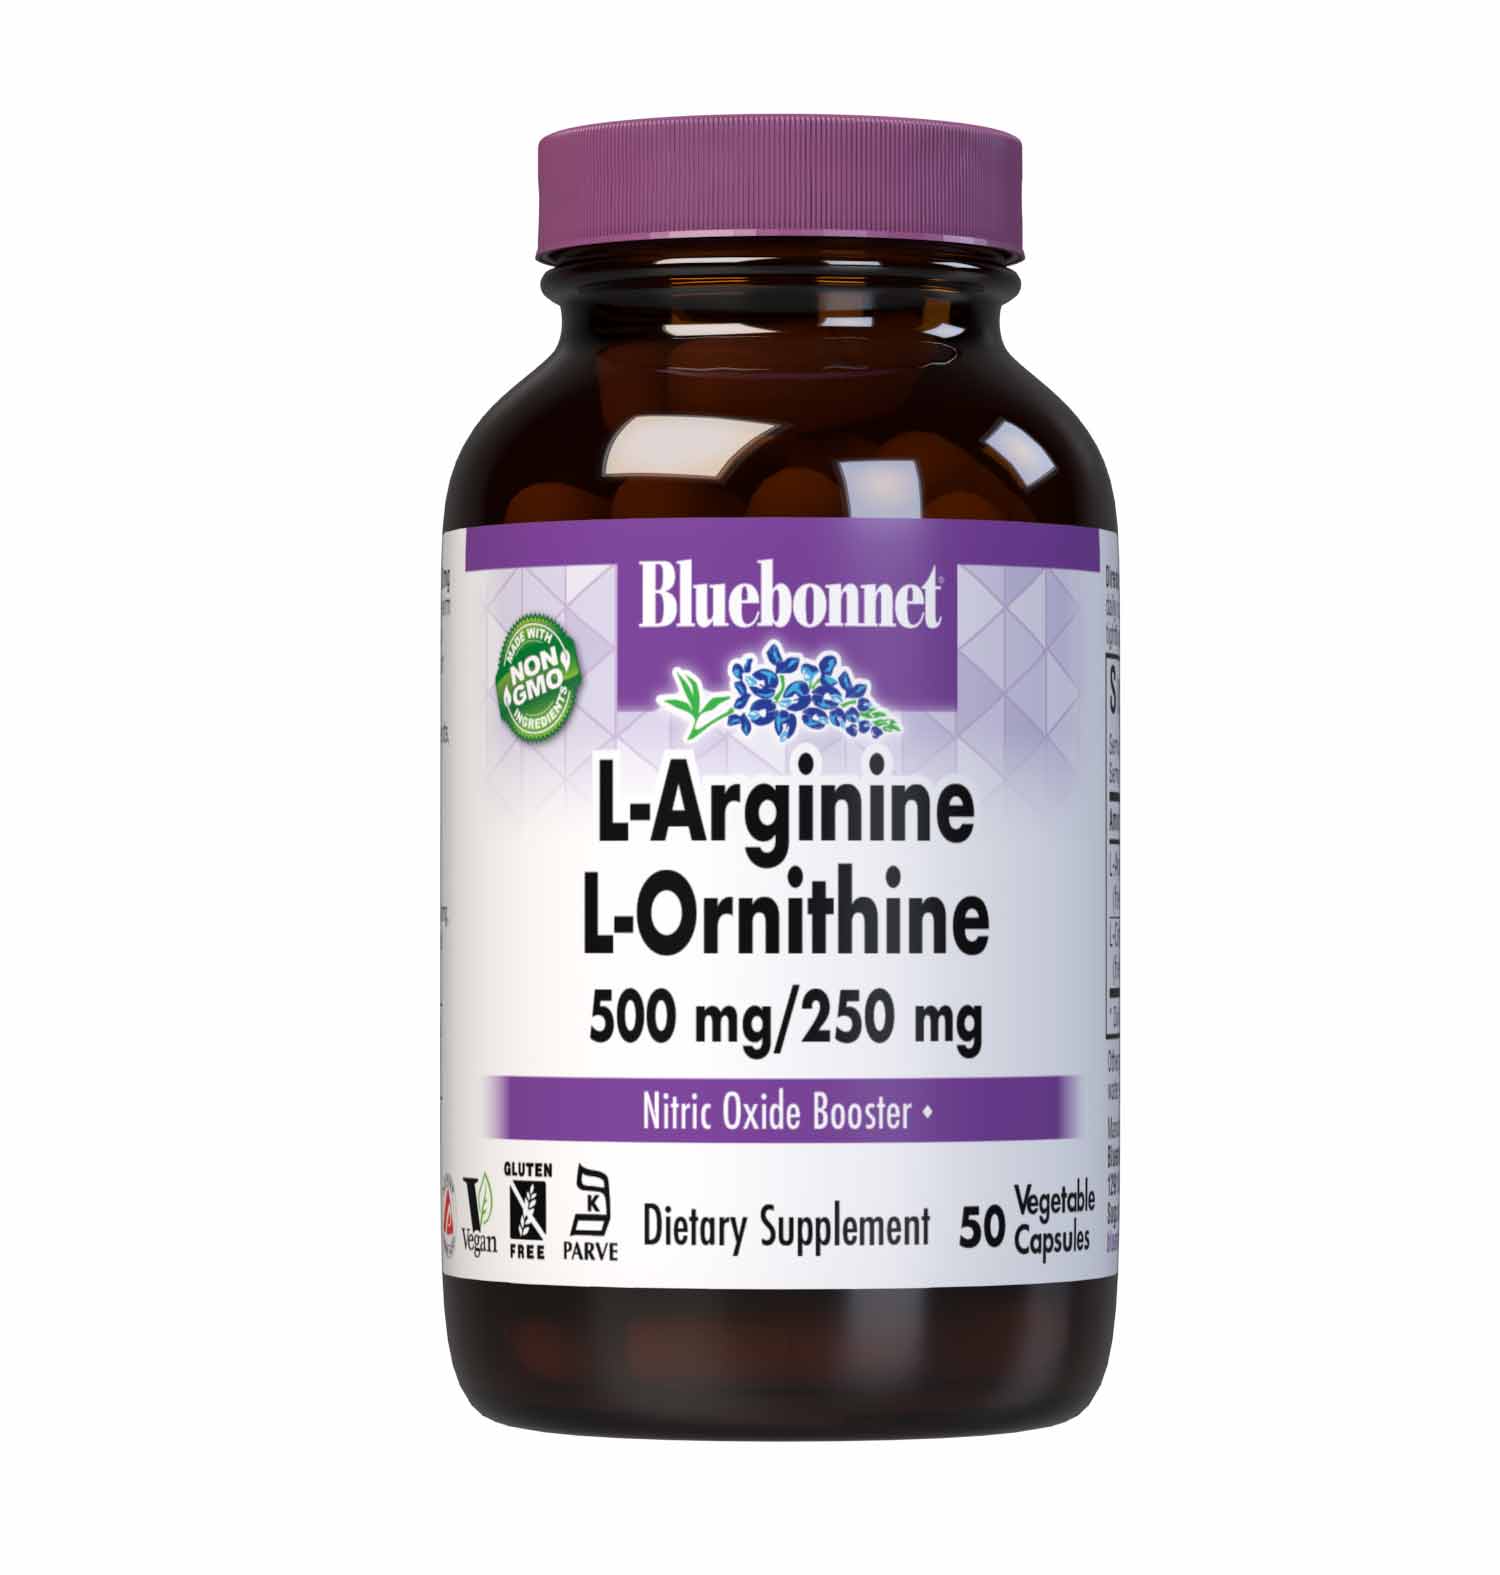 Bluebonnet’s L-Arginine 500 mg/L-Ornithine 250 mg 50 Vegetable Capsules provide the pharmaceutical grade, free-form amino acids L-arginine and L-ornithine HCI in their crystalline form from Ajinomoto. #size_50 count